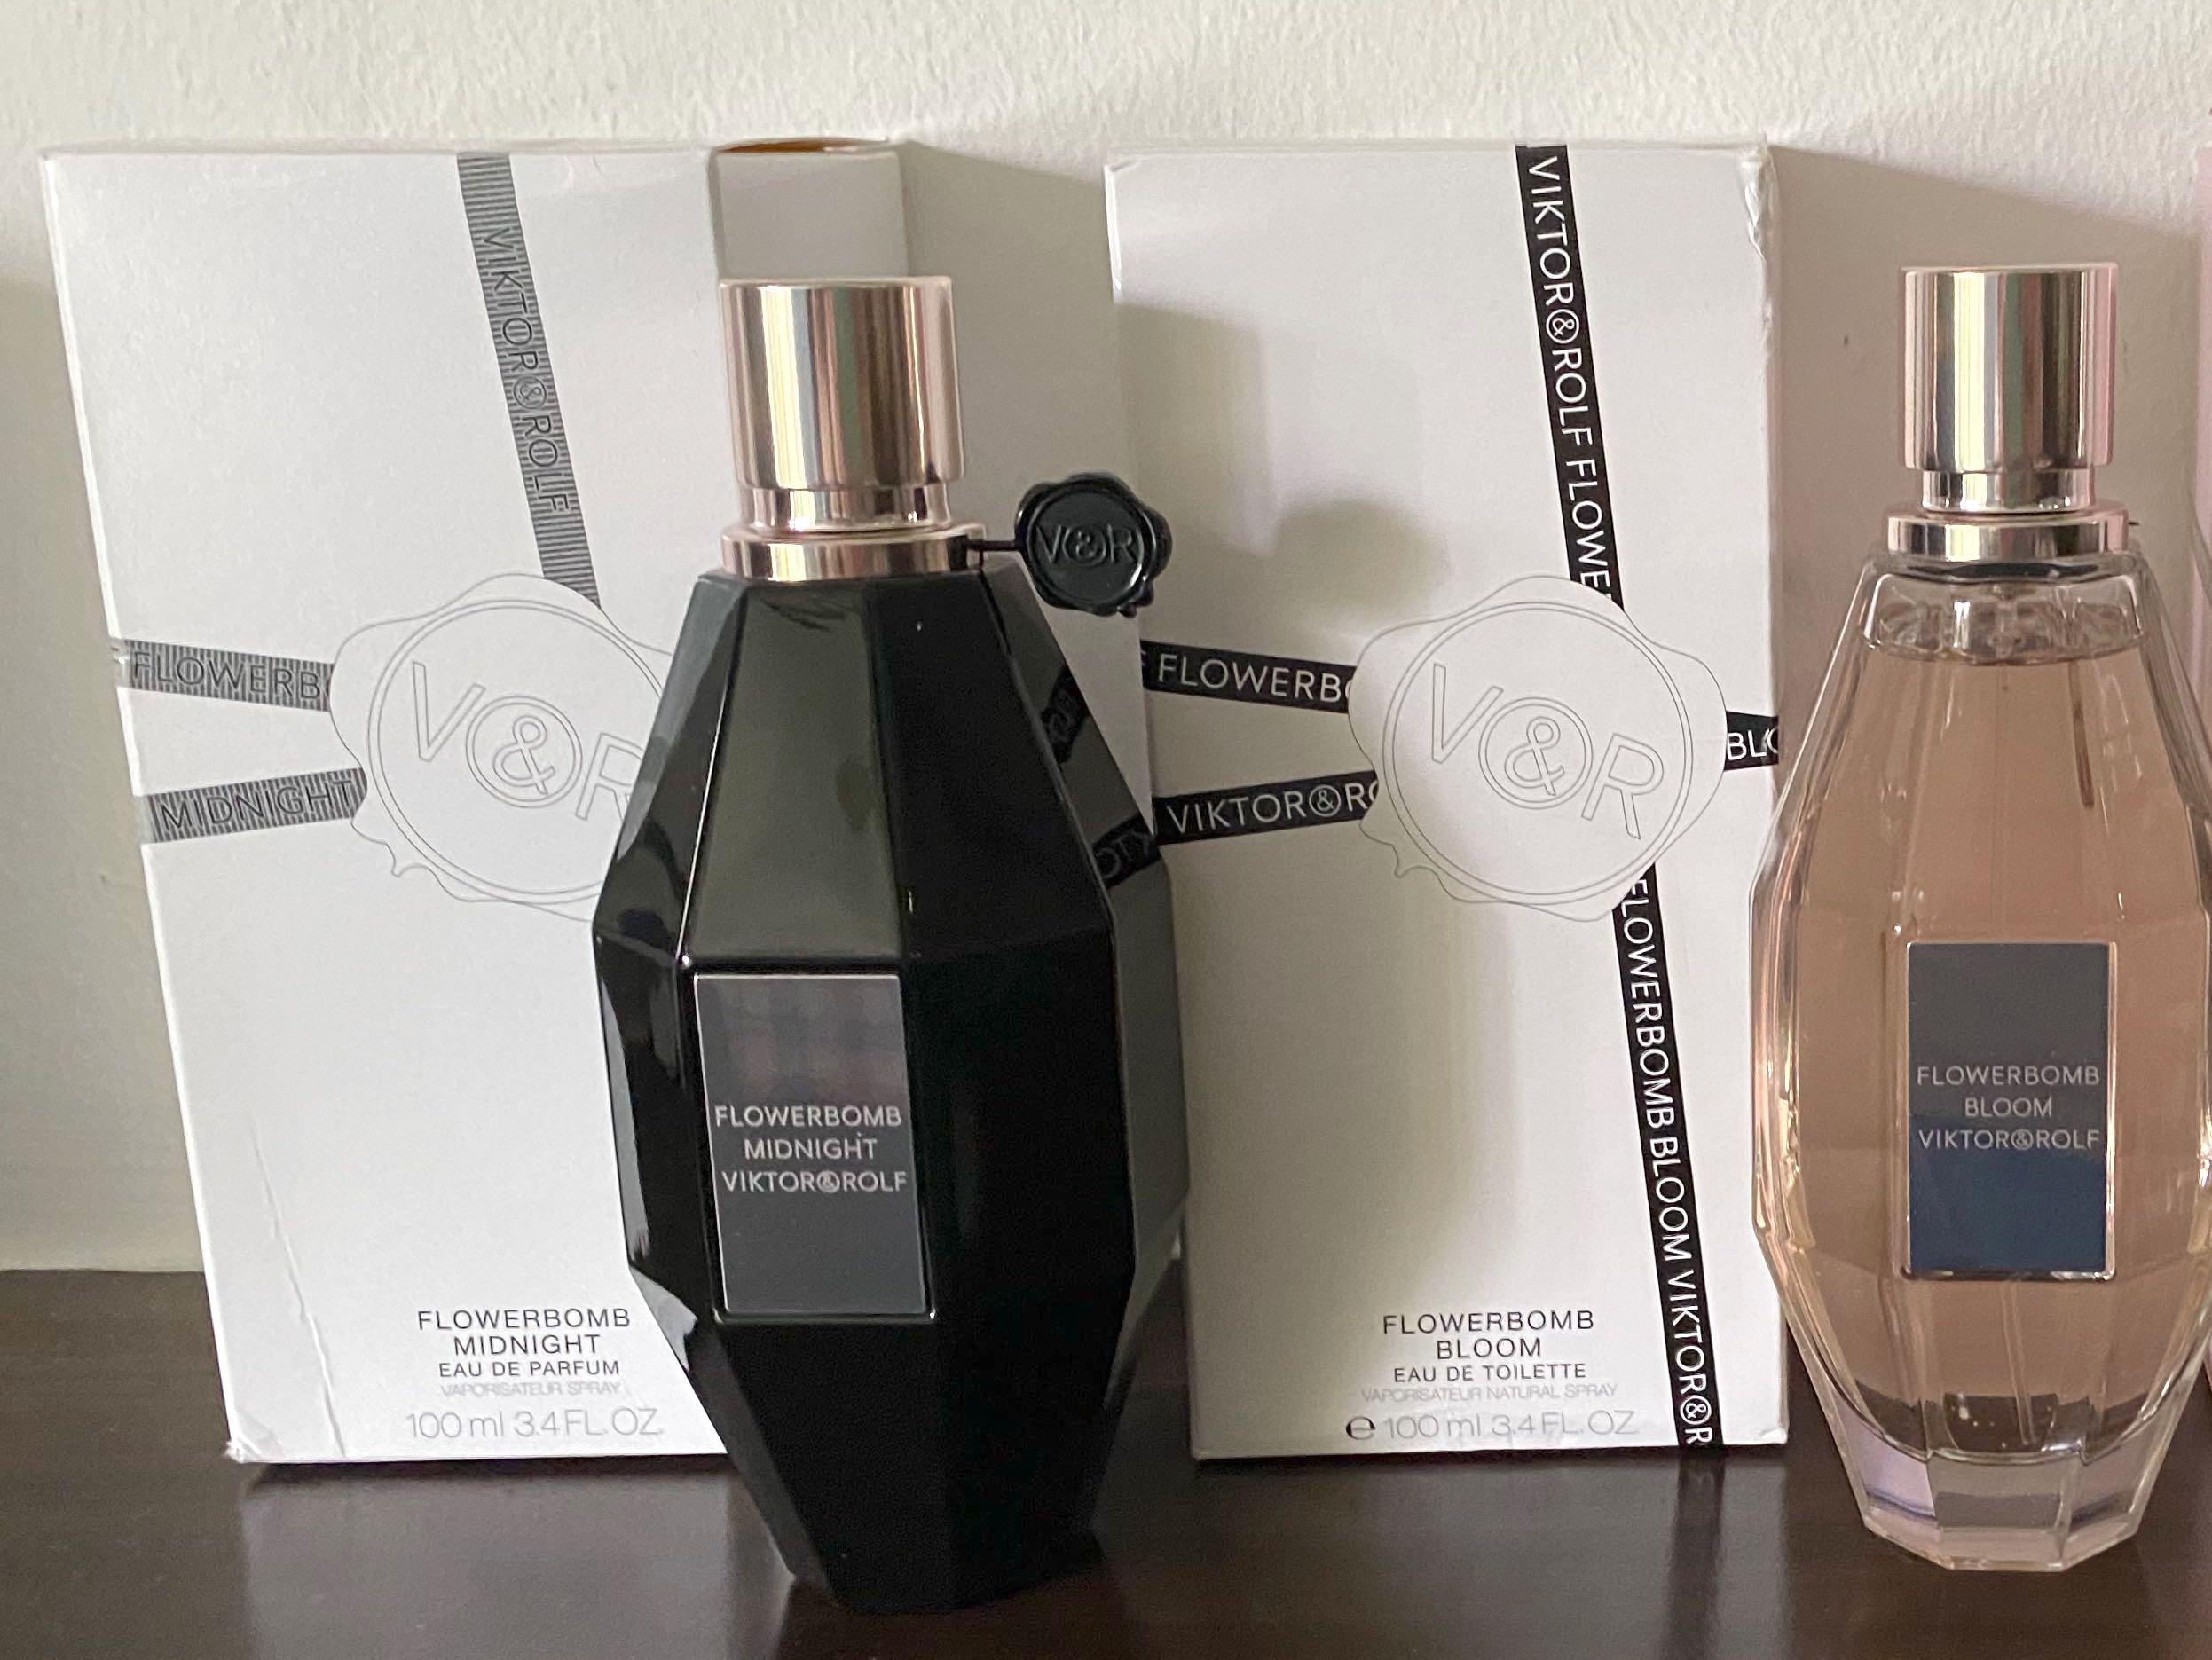 Viktor Rolf Flowerbomb Midnight Edp Tester Or Flowerbomb Bloom Edt Tester For Women Free Delivery Health Beauty Perfumes Deodorants On Carousell